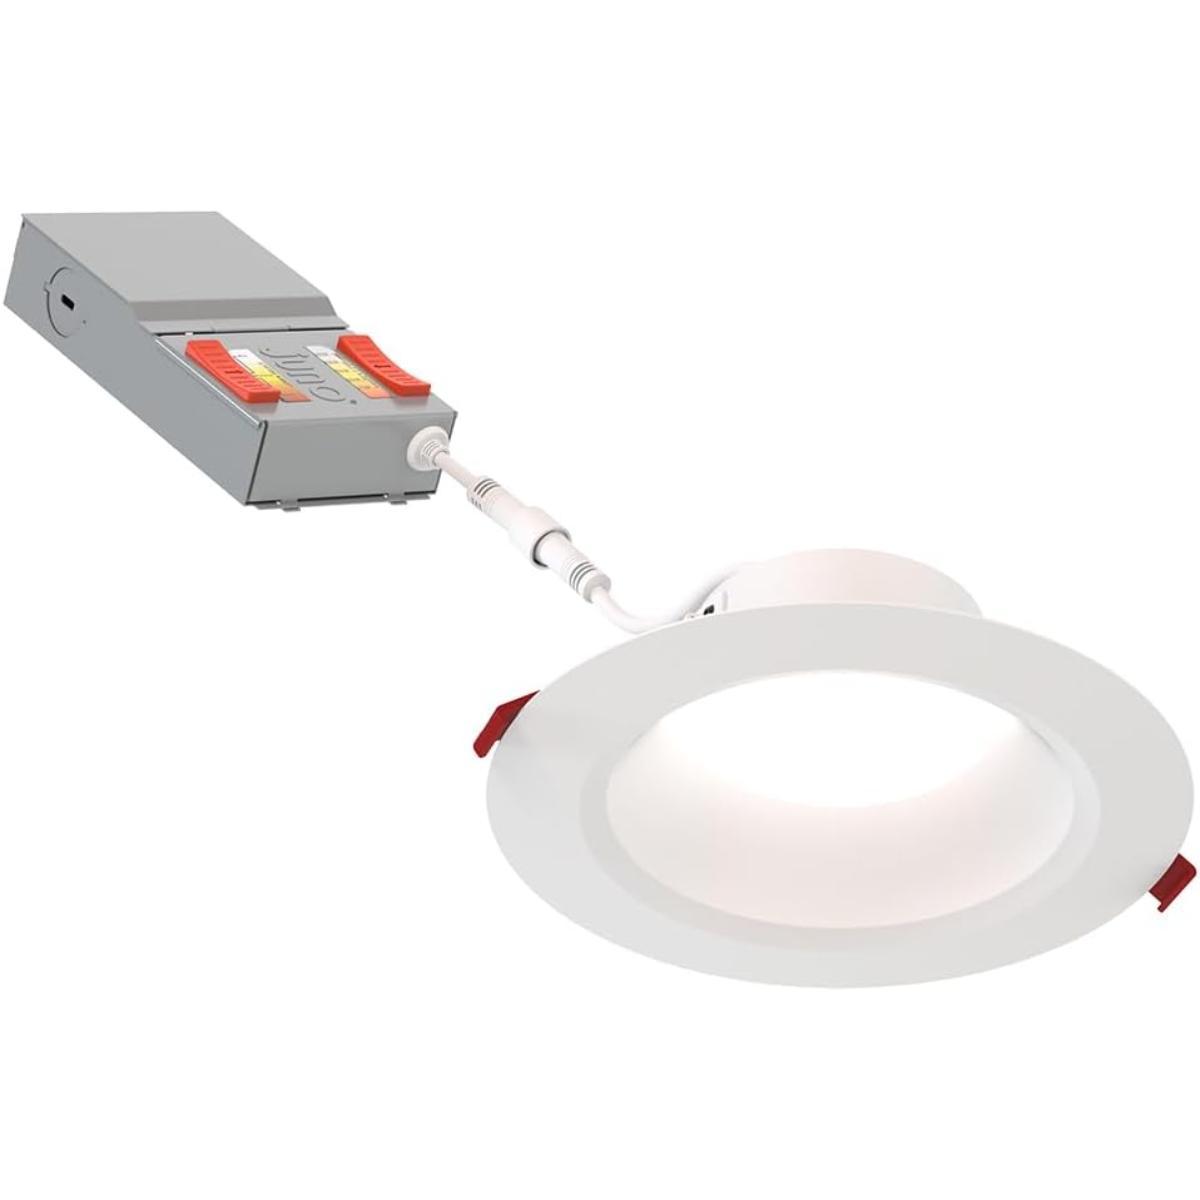 6 inch Wafer Canless LED Recessed Light, 16 Watt, 1300 Lumens, Selectable CCT, 2700K to 5000K, Smooth Trim (Pack Of 6)